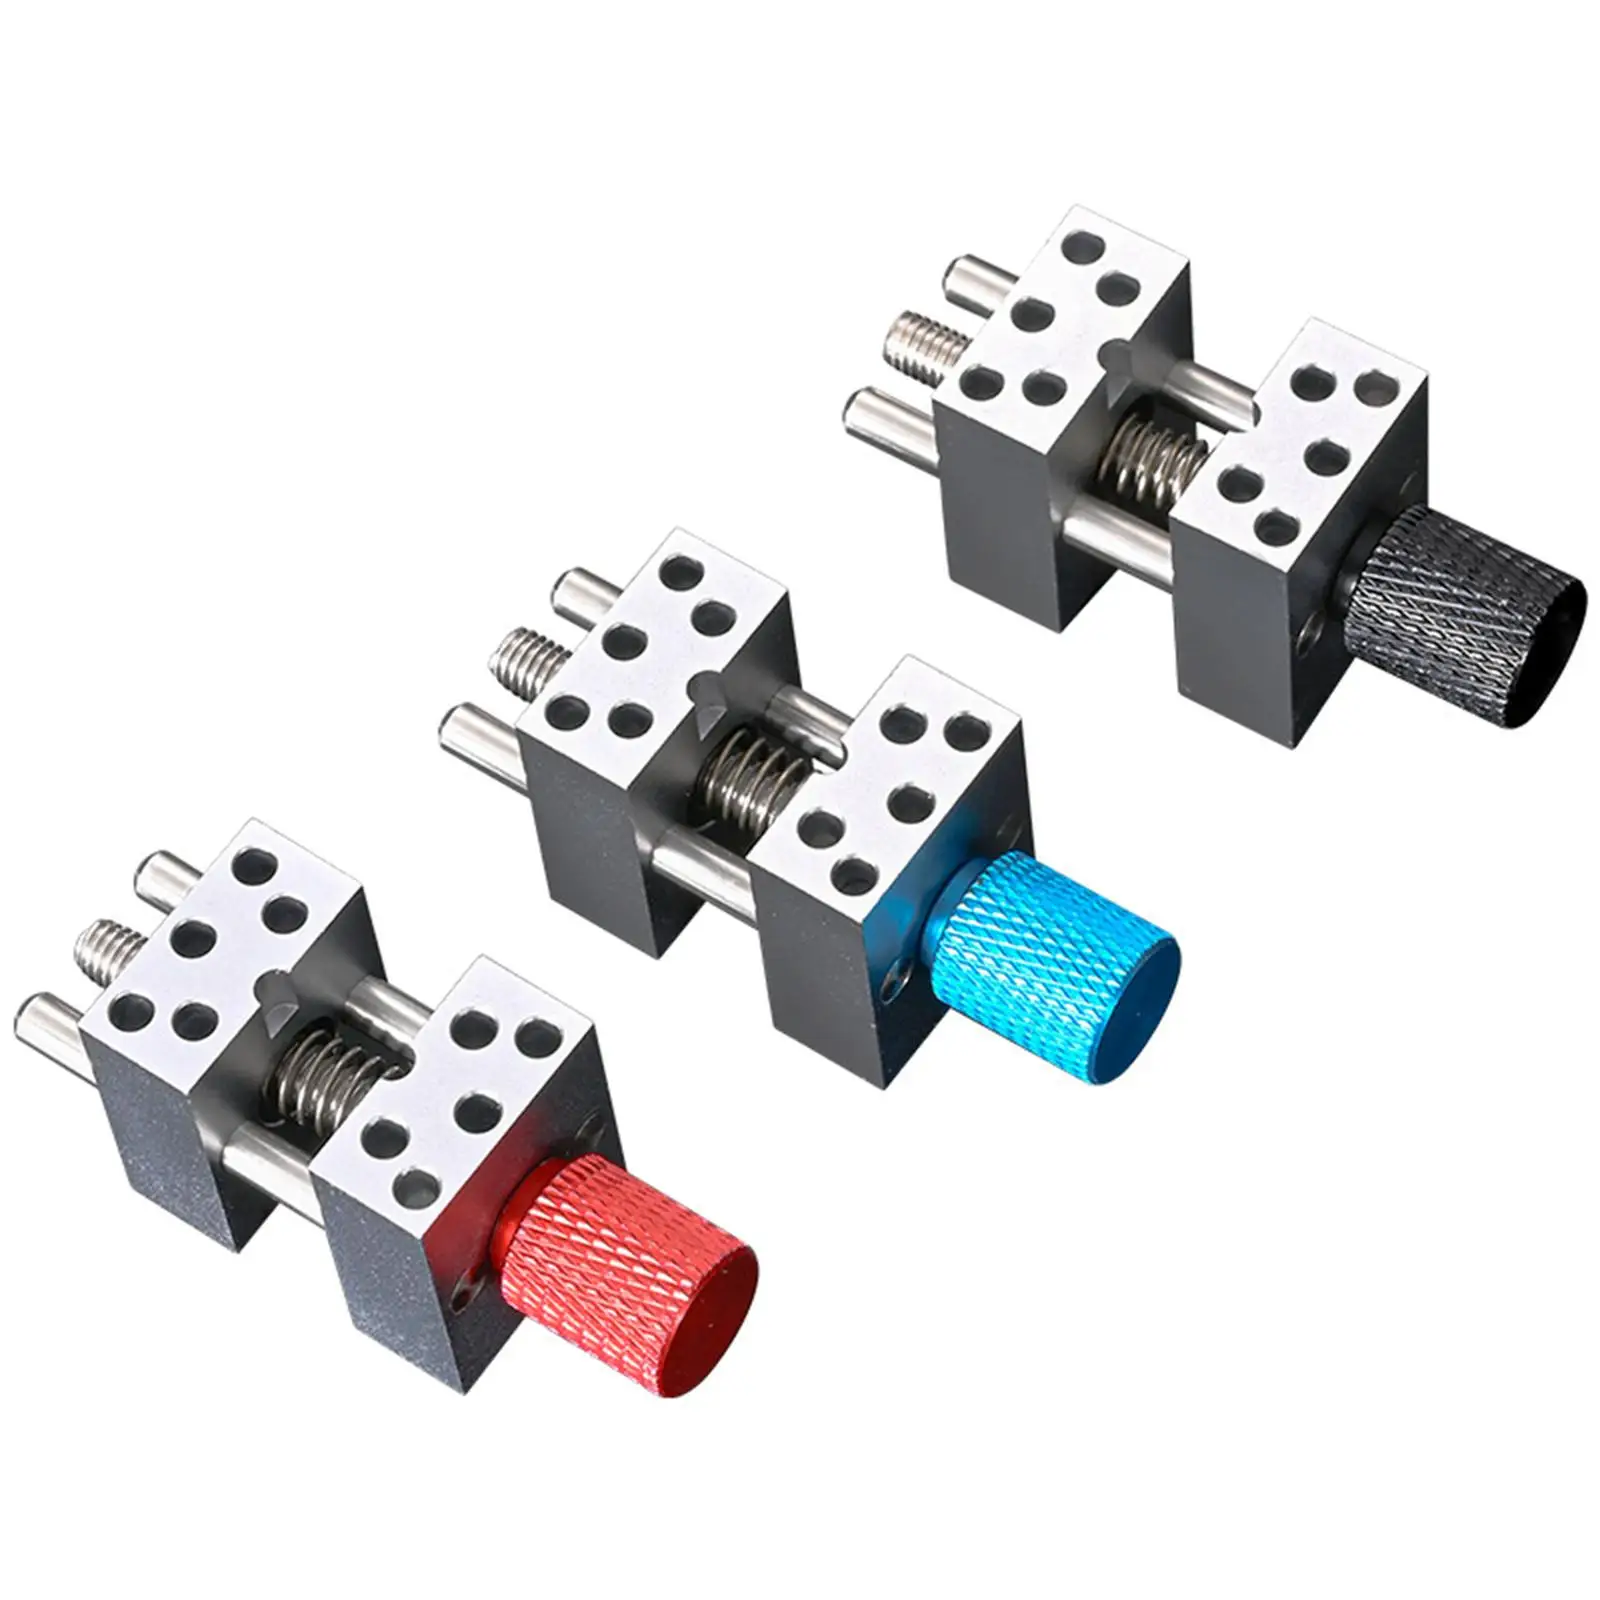 Mini Drill Press Vise Clamp Multifunctional for Model Making Model Building Tools Watch Model Parts Engraving Cutting Coloring